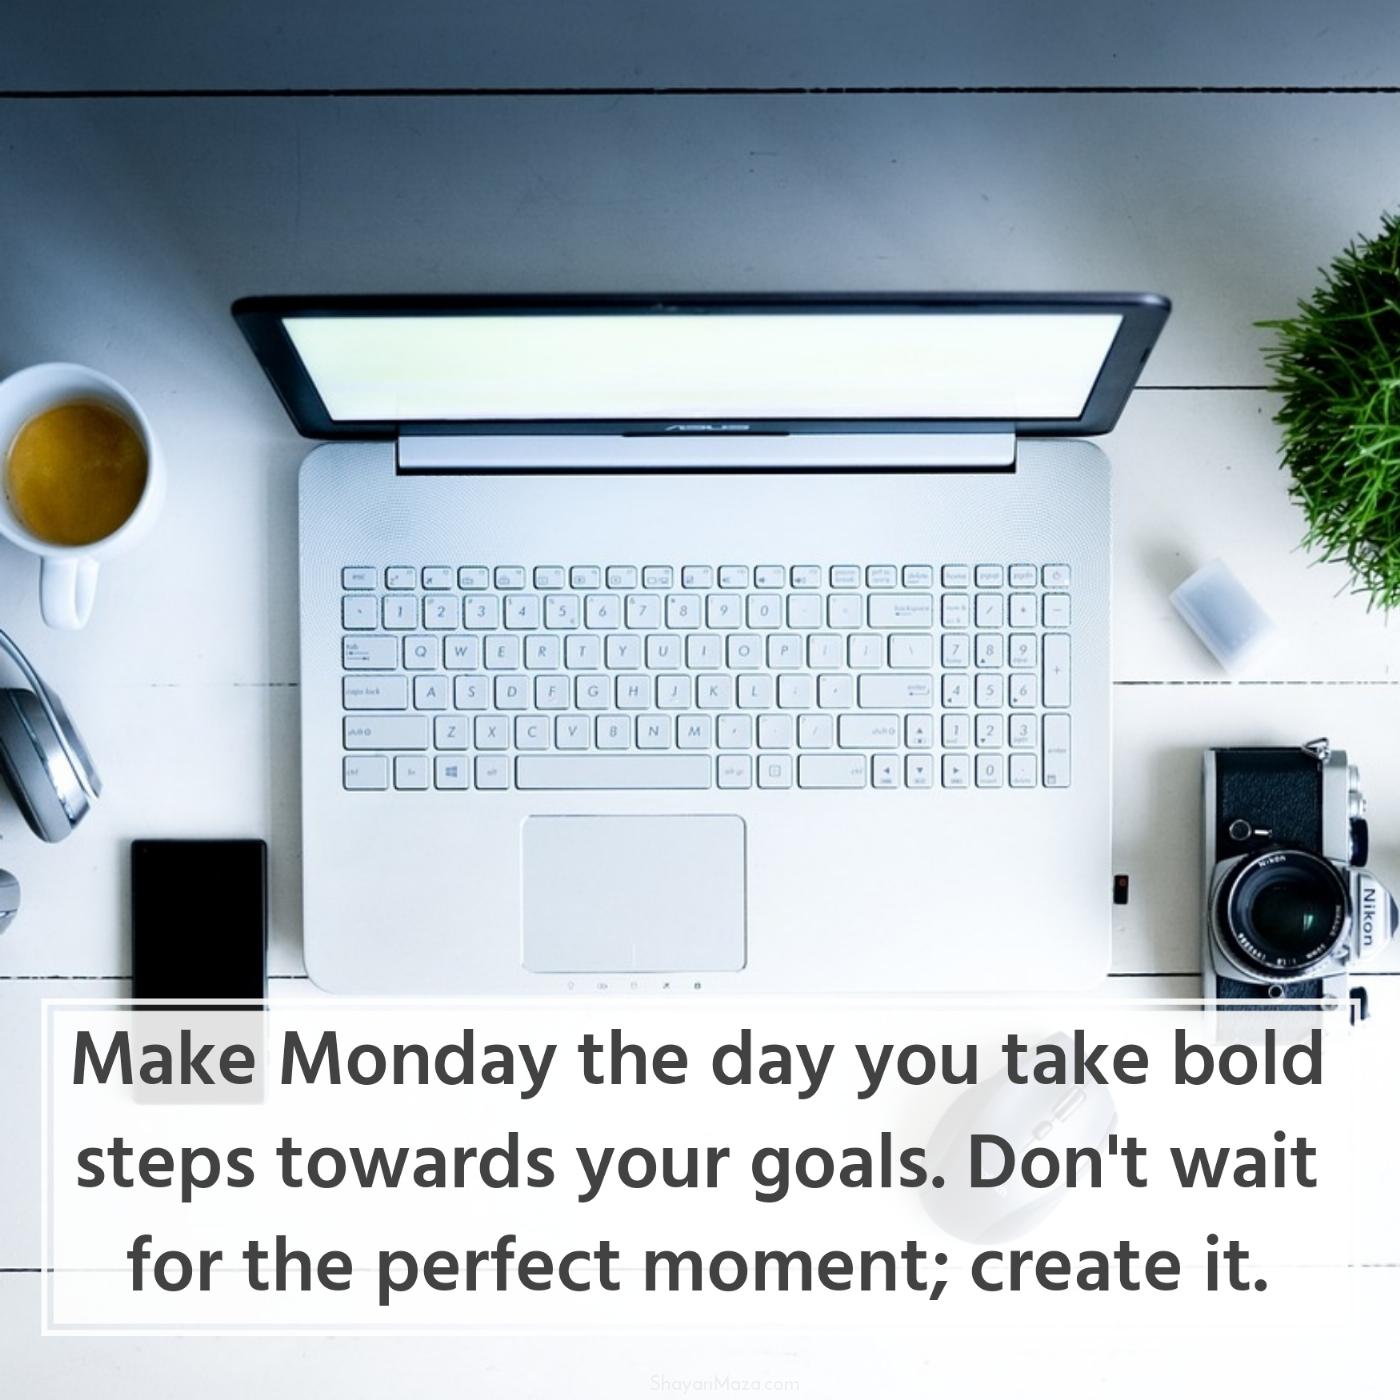 Make Monday the day you take bold steps towards your goals